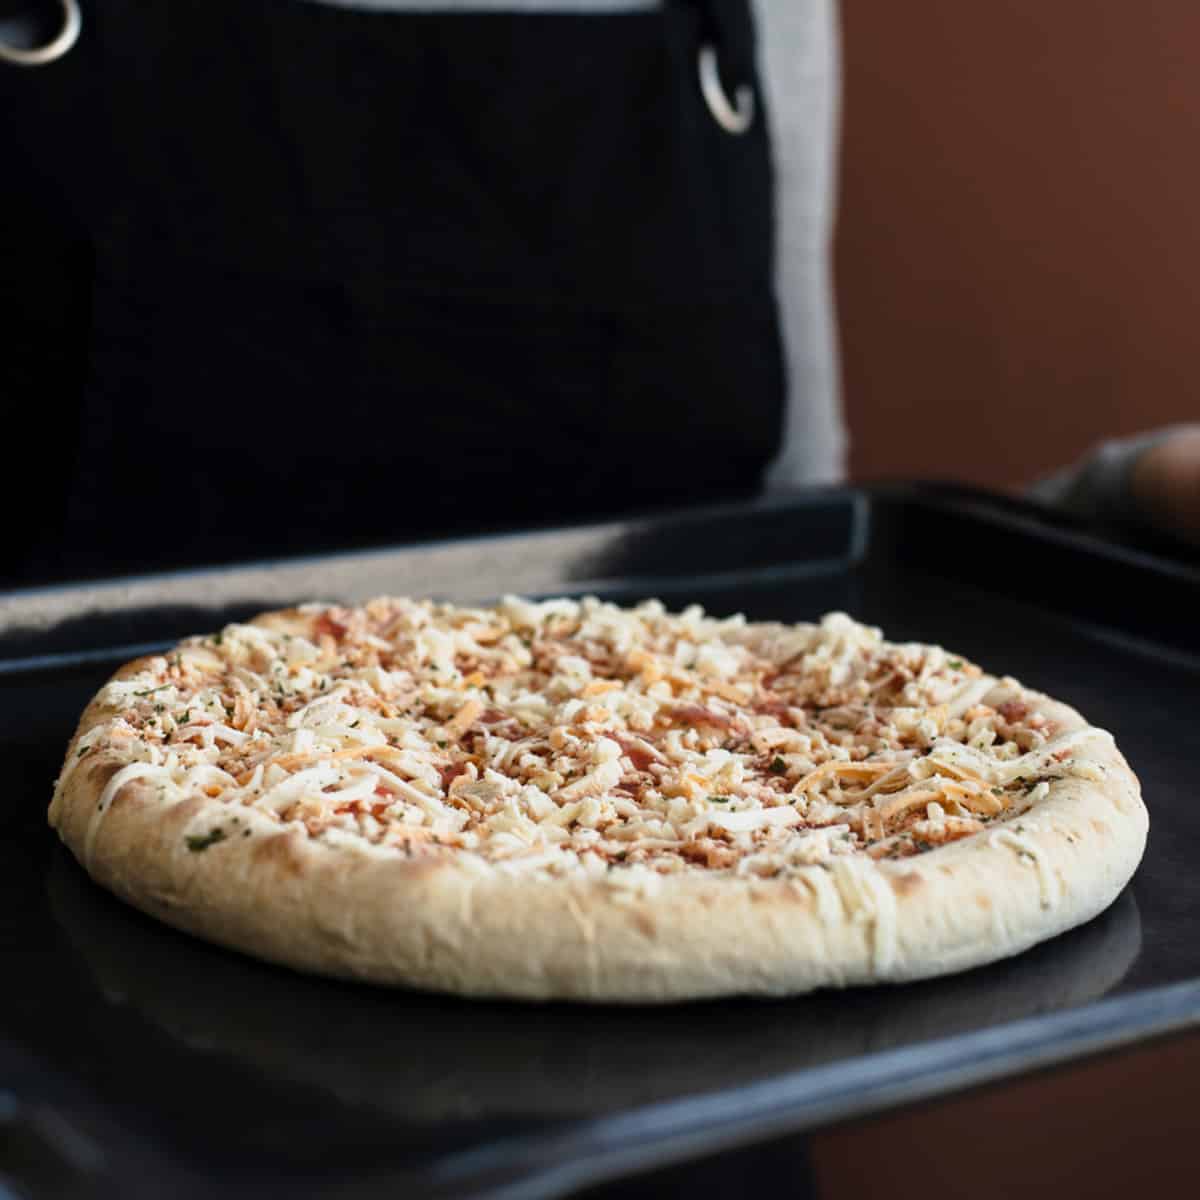 Pizzas made with frozen dough tend to be soft and fluffy because there is a lot of water in the dough.